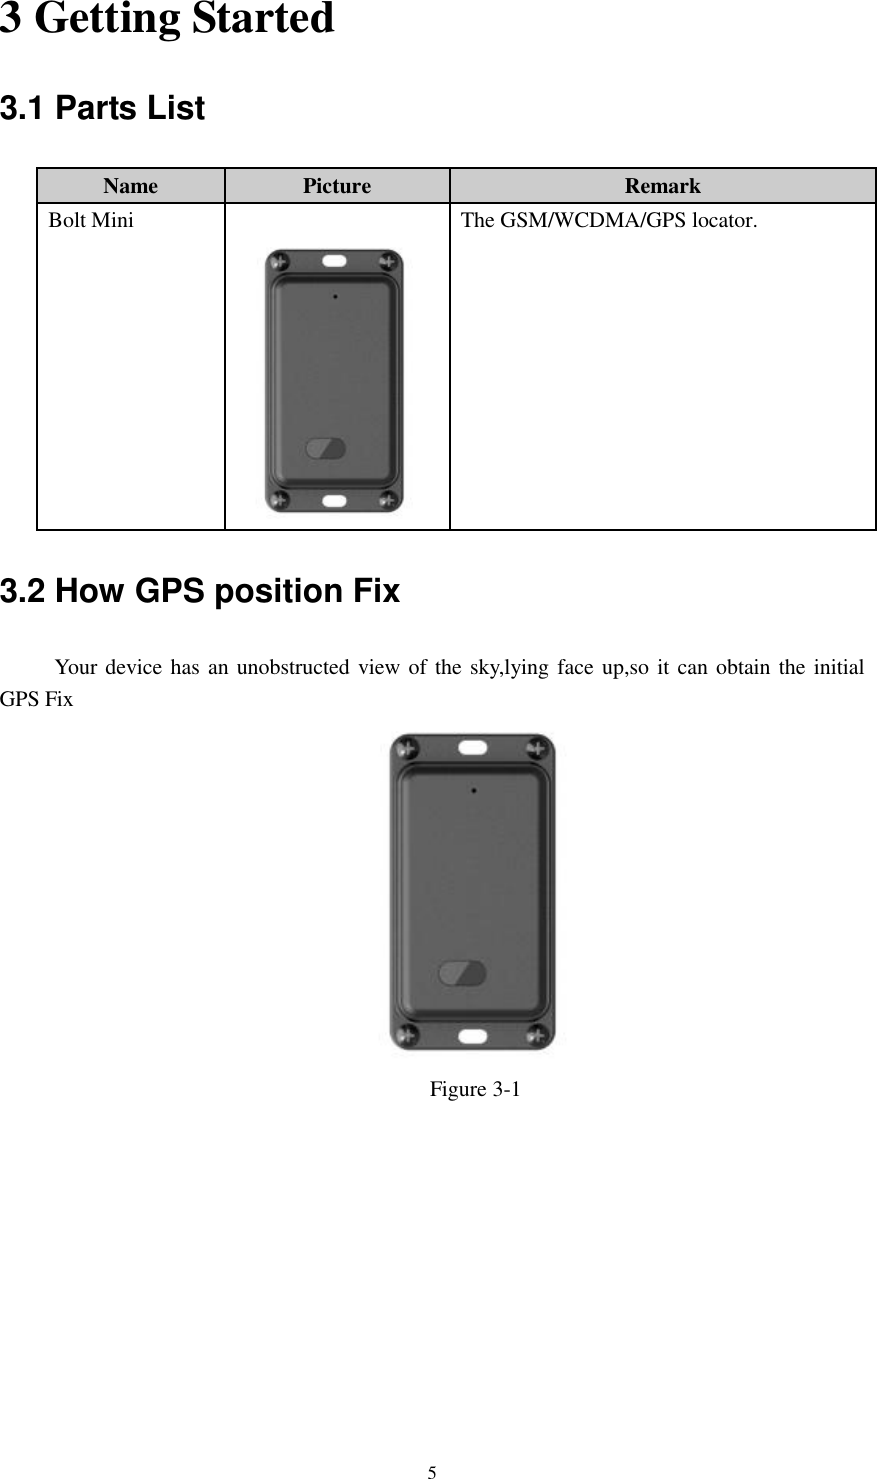 53 Getting Started 3.1 Parts List Name Picture Remark Bolt Mini The GSM/WCDMA/GPS locator.  3.2 How GPS position Fix      Your device has an unobstructed view of the sky,lying face up,so it can obtain the initial GPS Fix Figure 3-1 